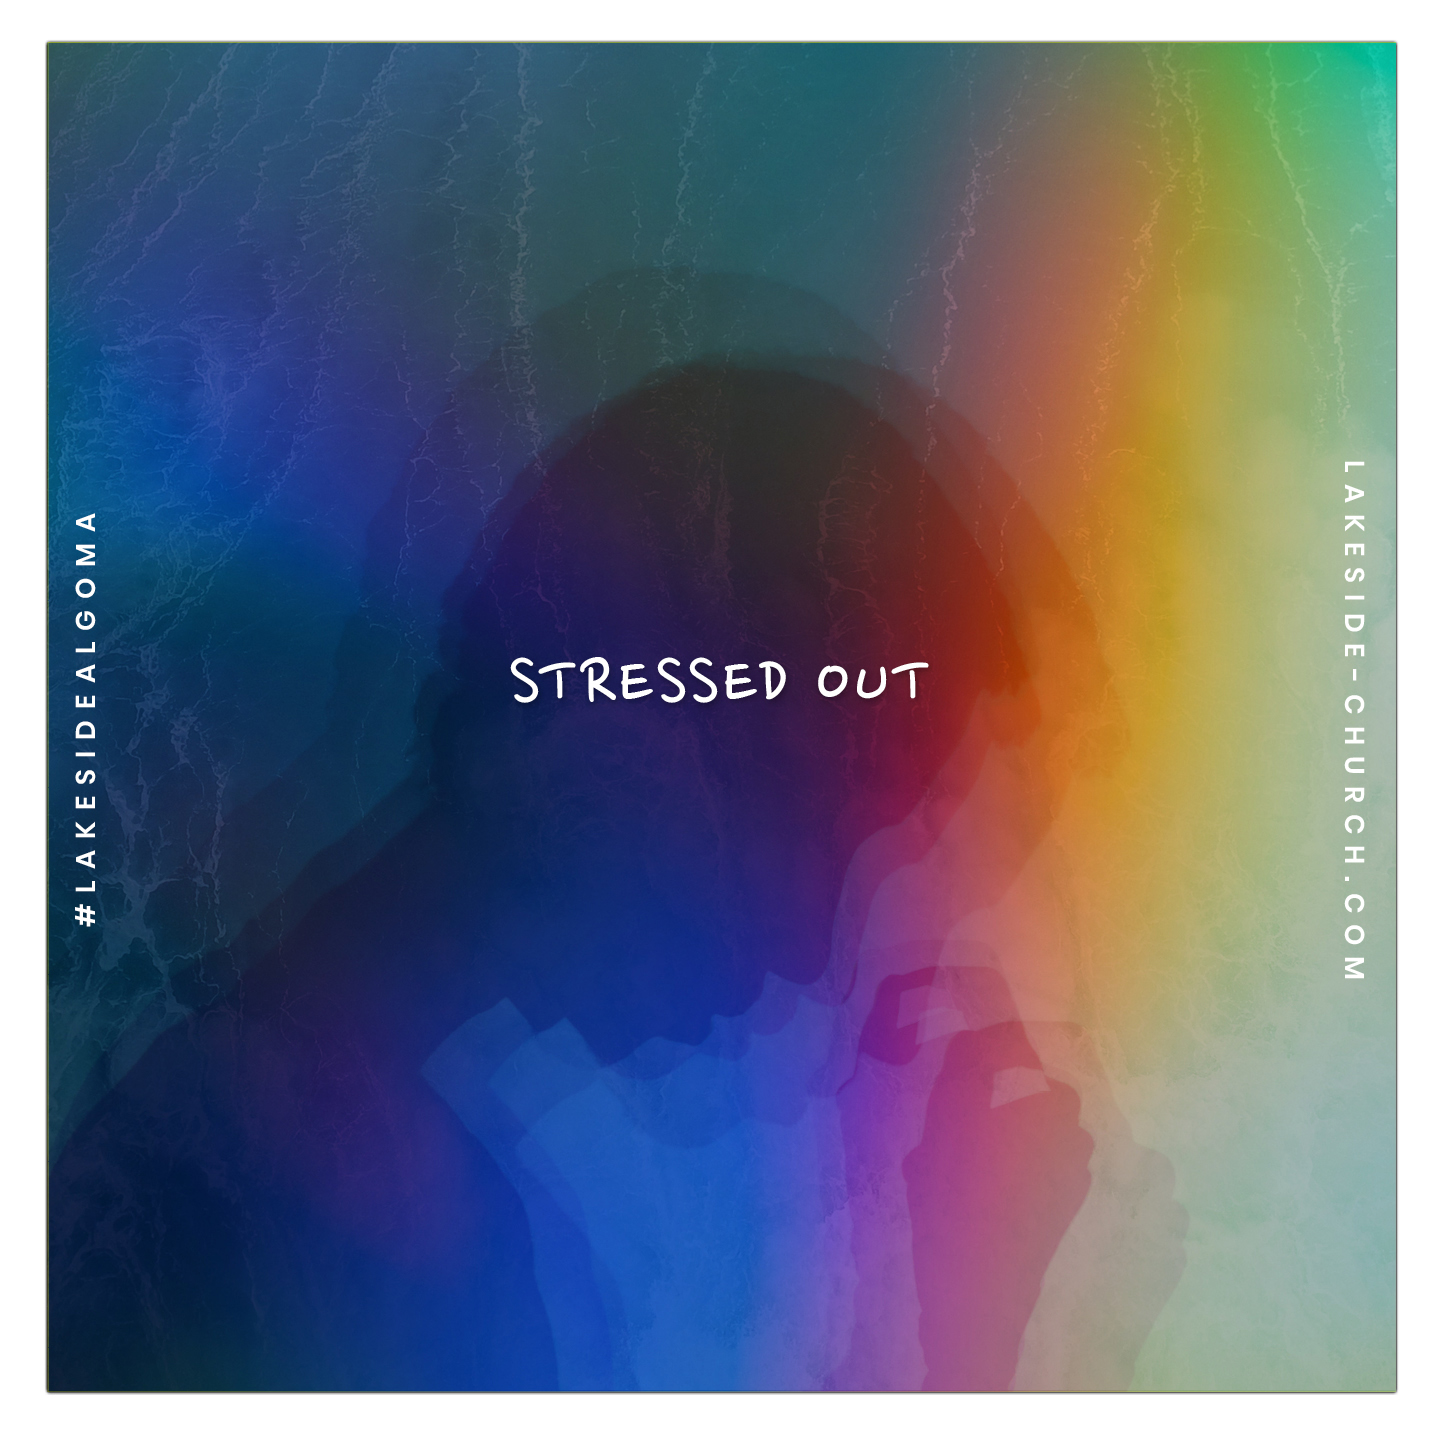 STRESSED OUT